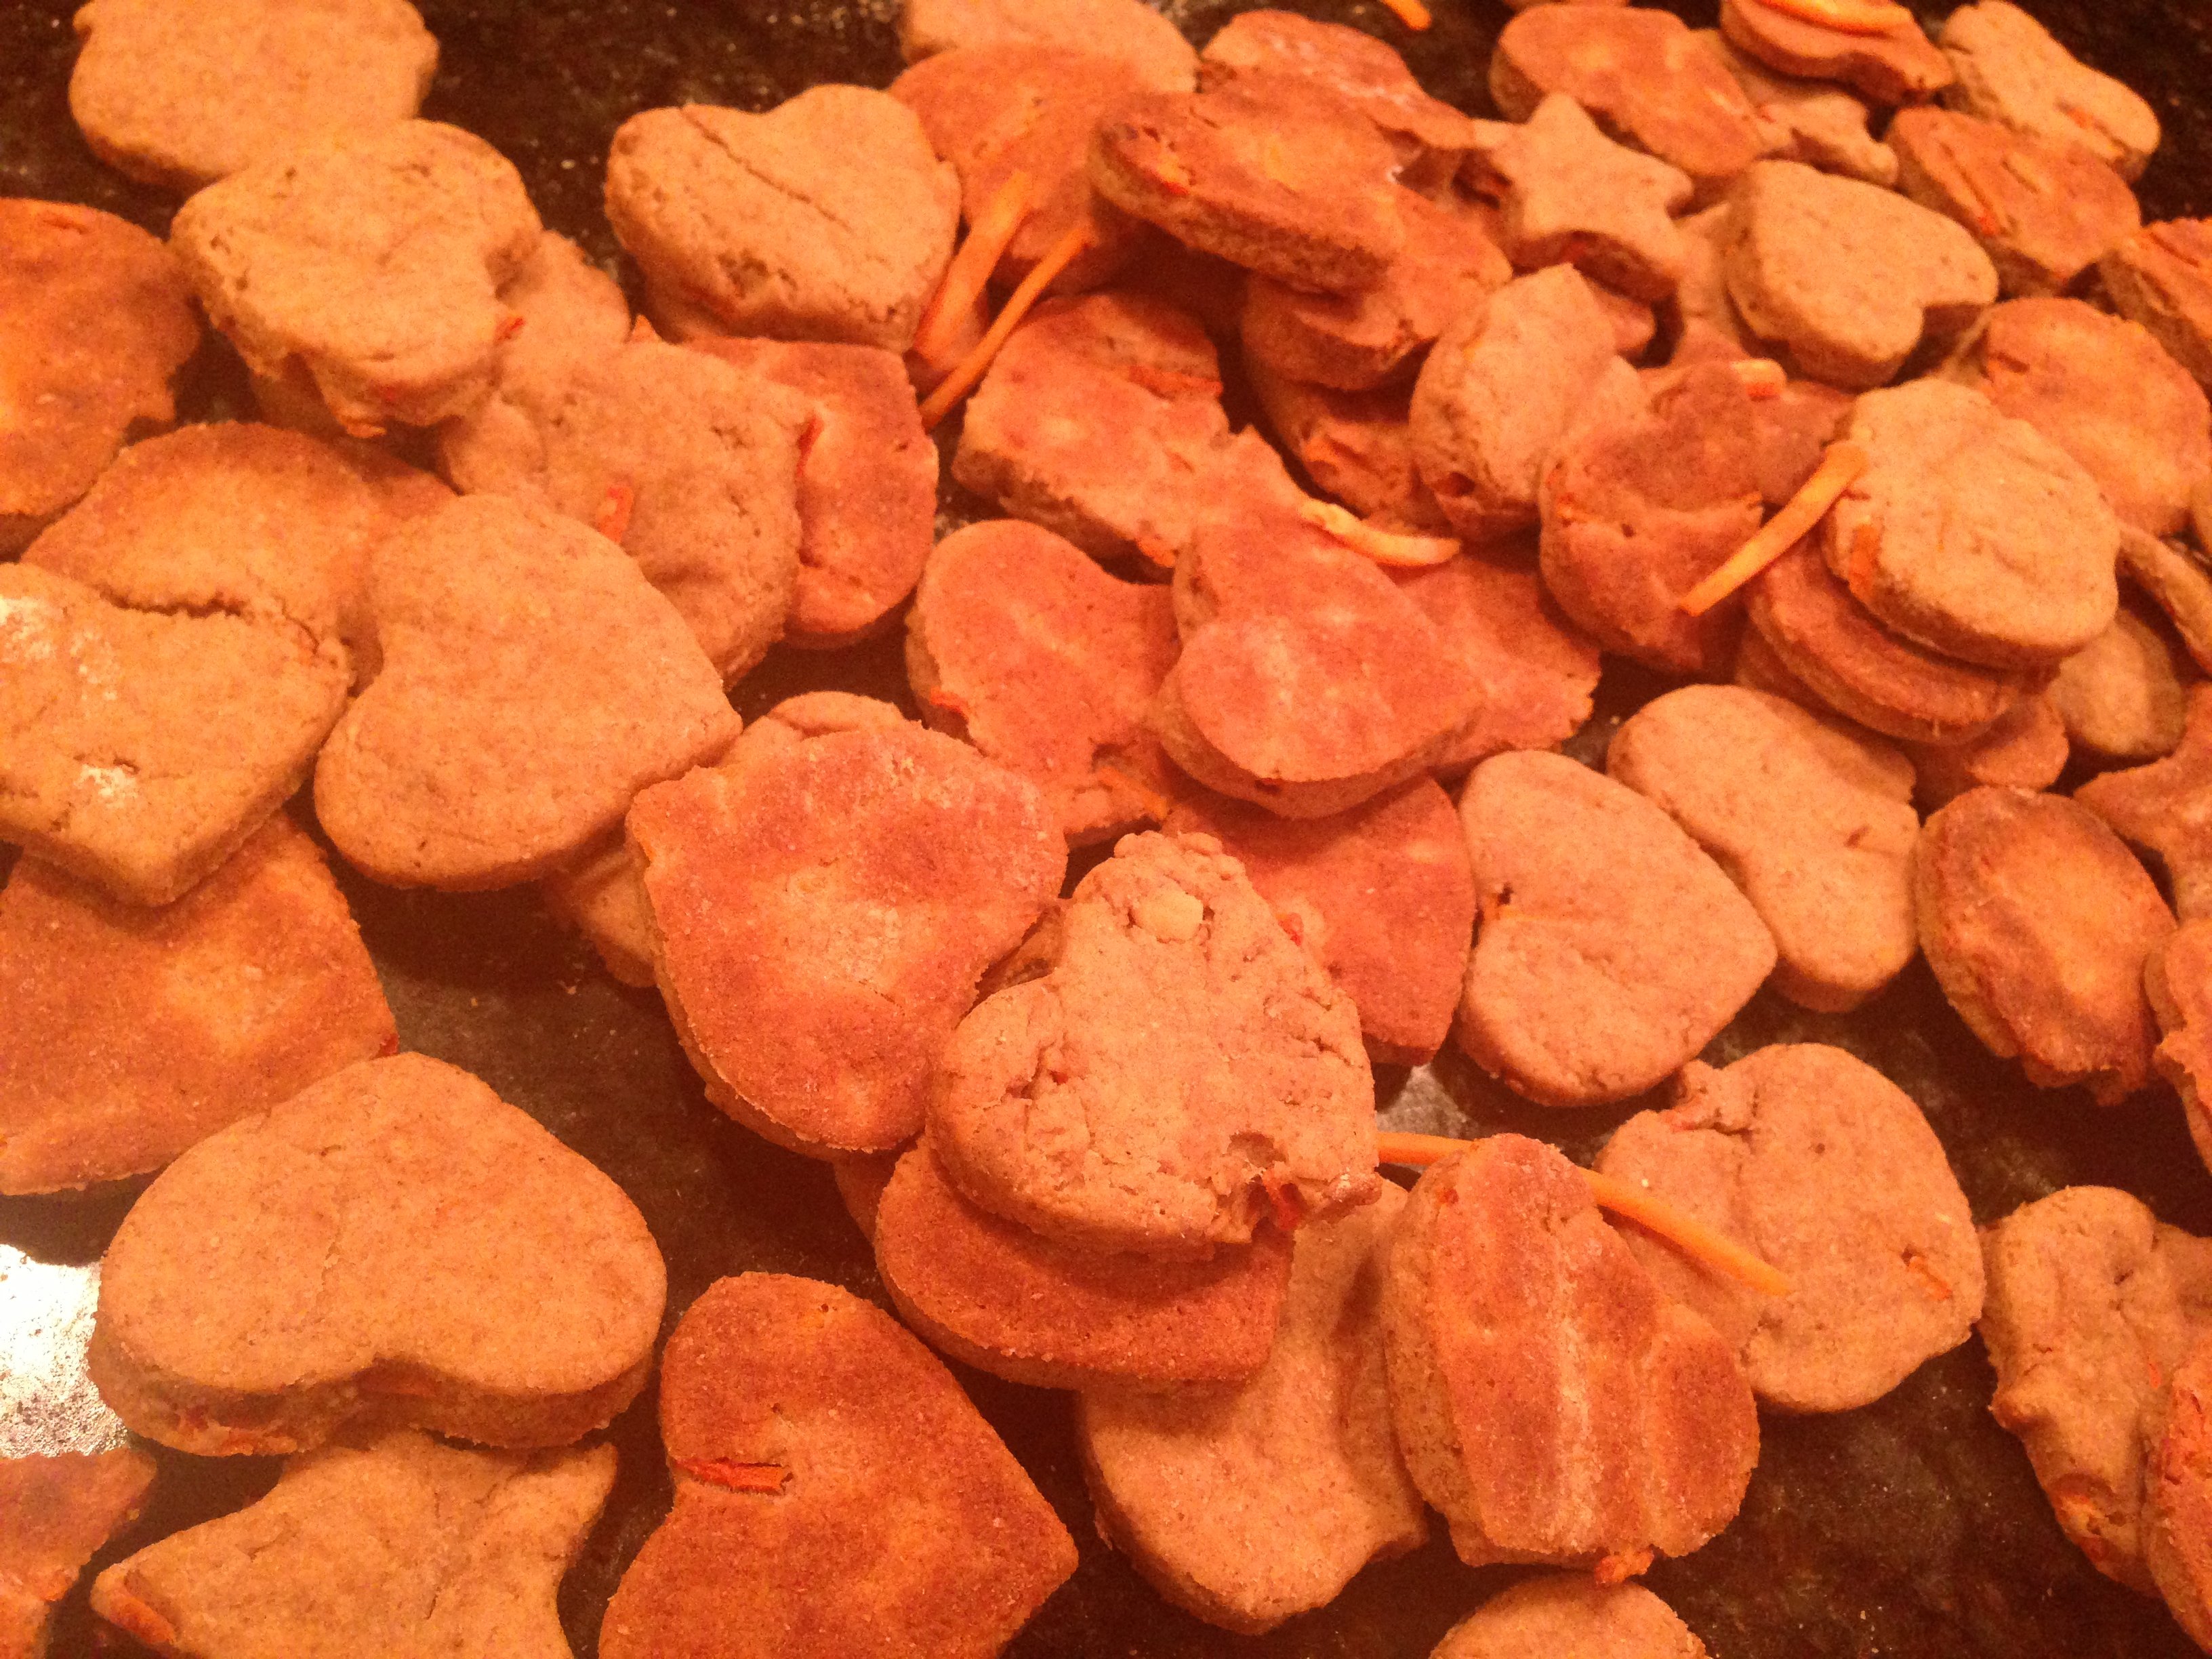 carrot dog biscuit recipe